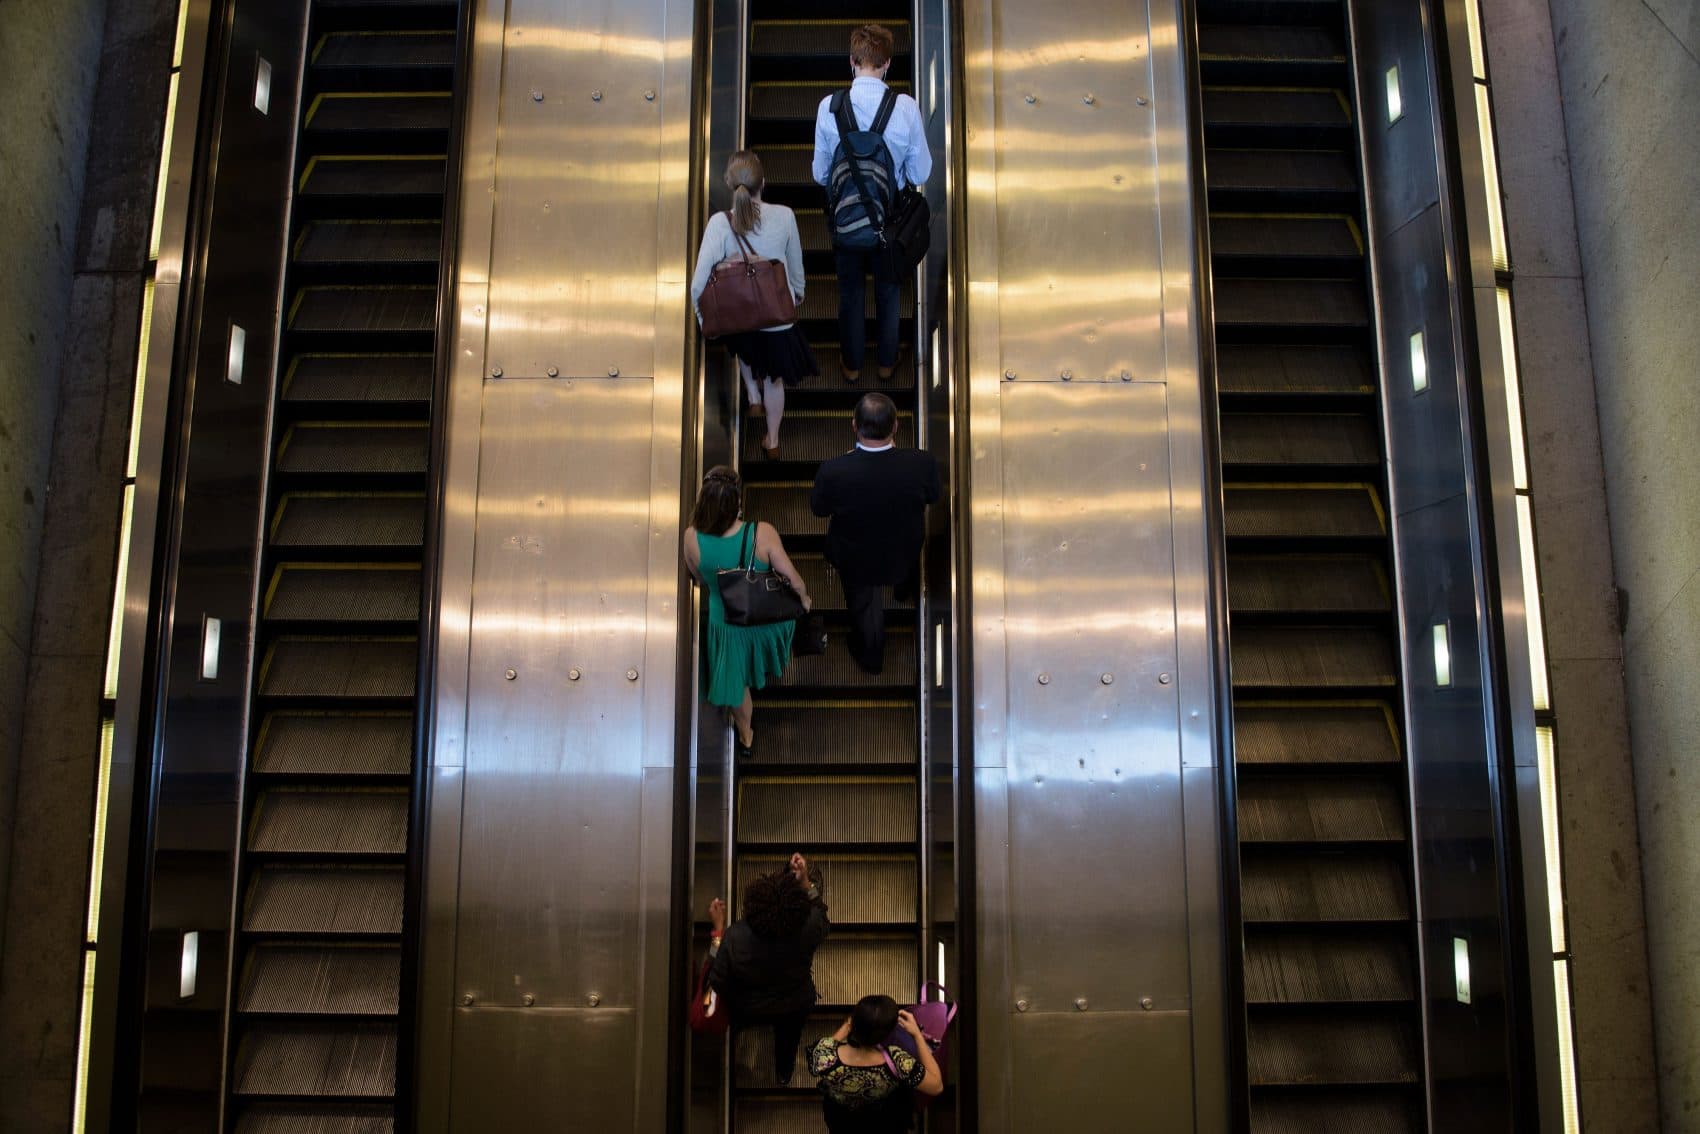 People ride an escalator to exit the Metro transit system in Washington, D.C. (Brendan Smialowski/AFP/Getty Images)